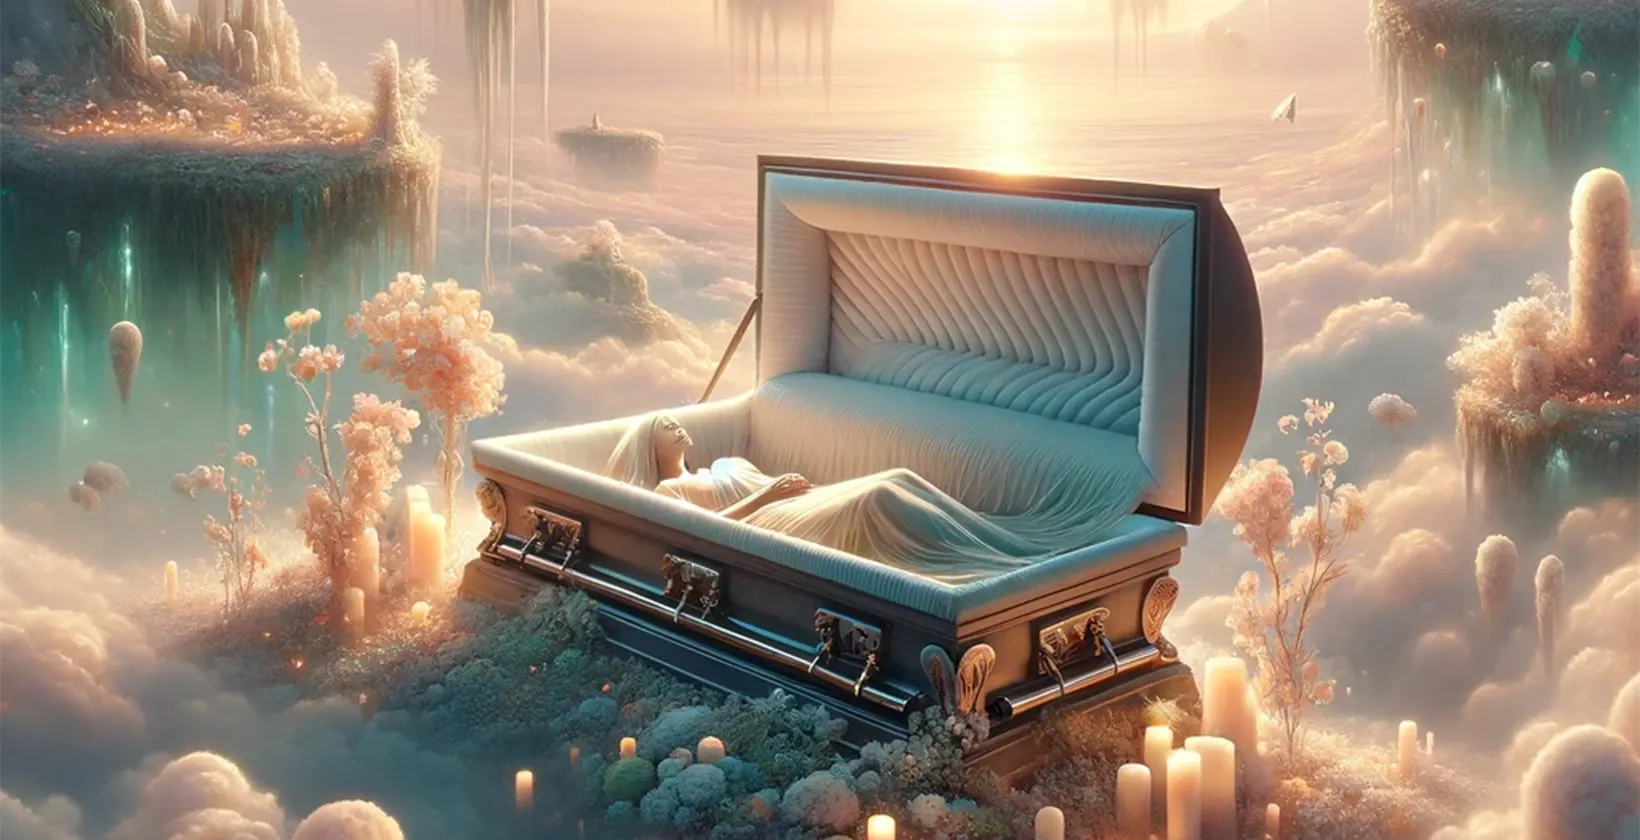 Dream Meaning of Dead Person Alive in Coffin